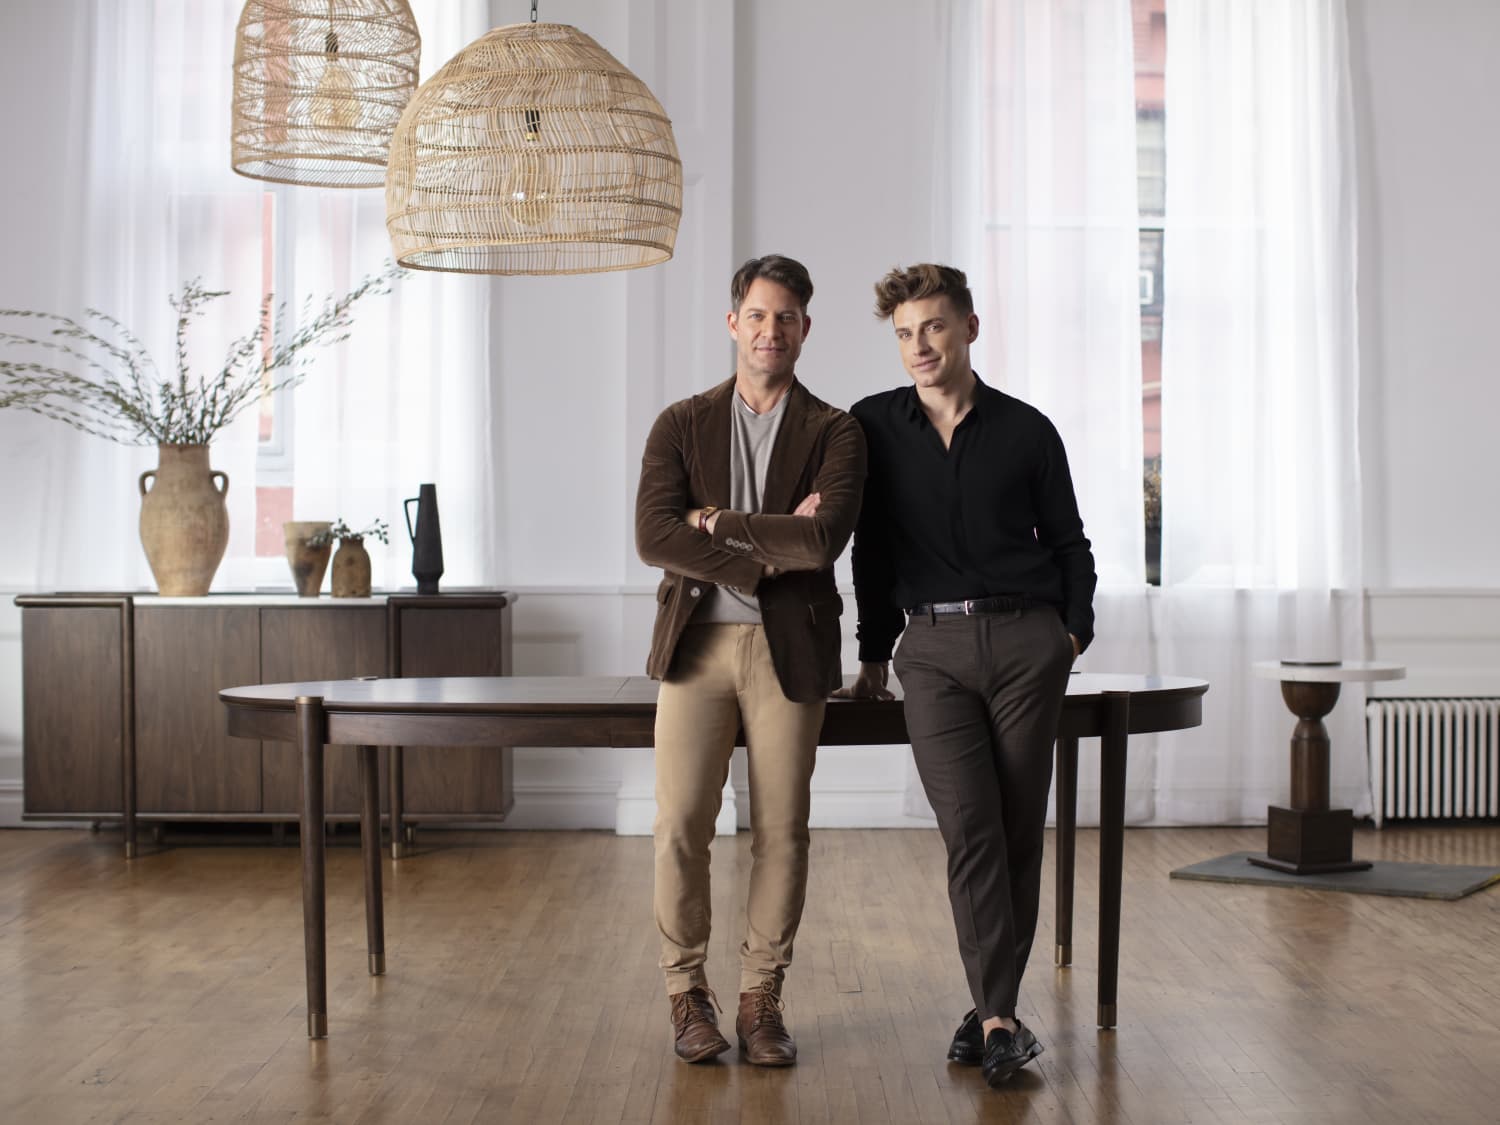 Everything You Need To Know About Nate Berkus' New Home Collection